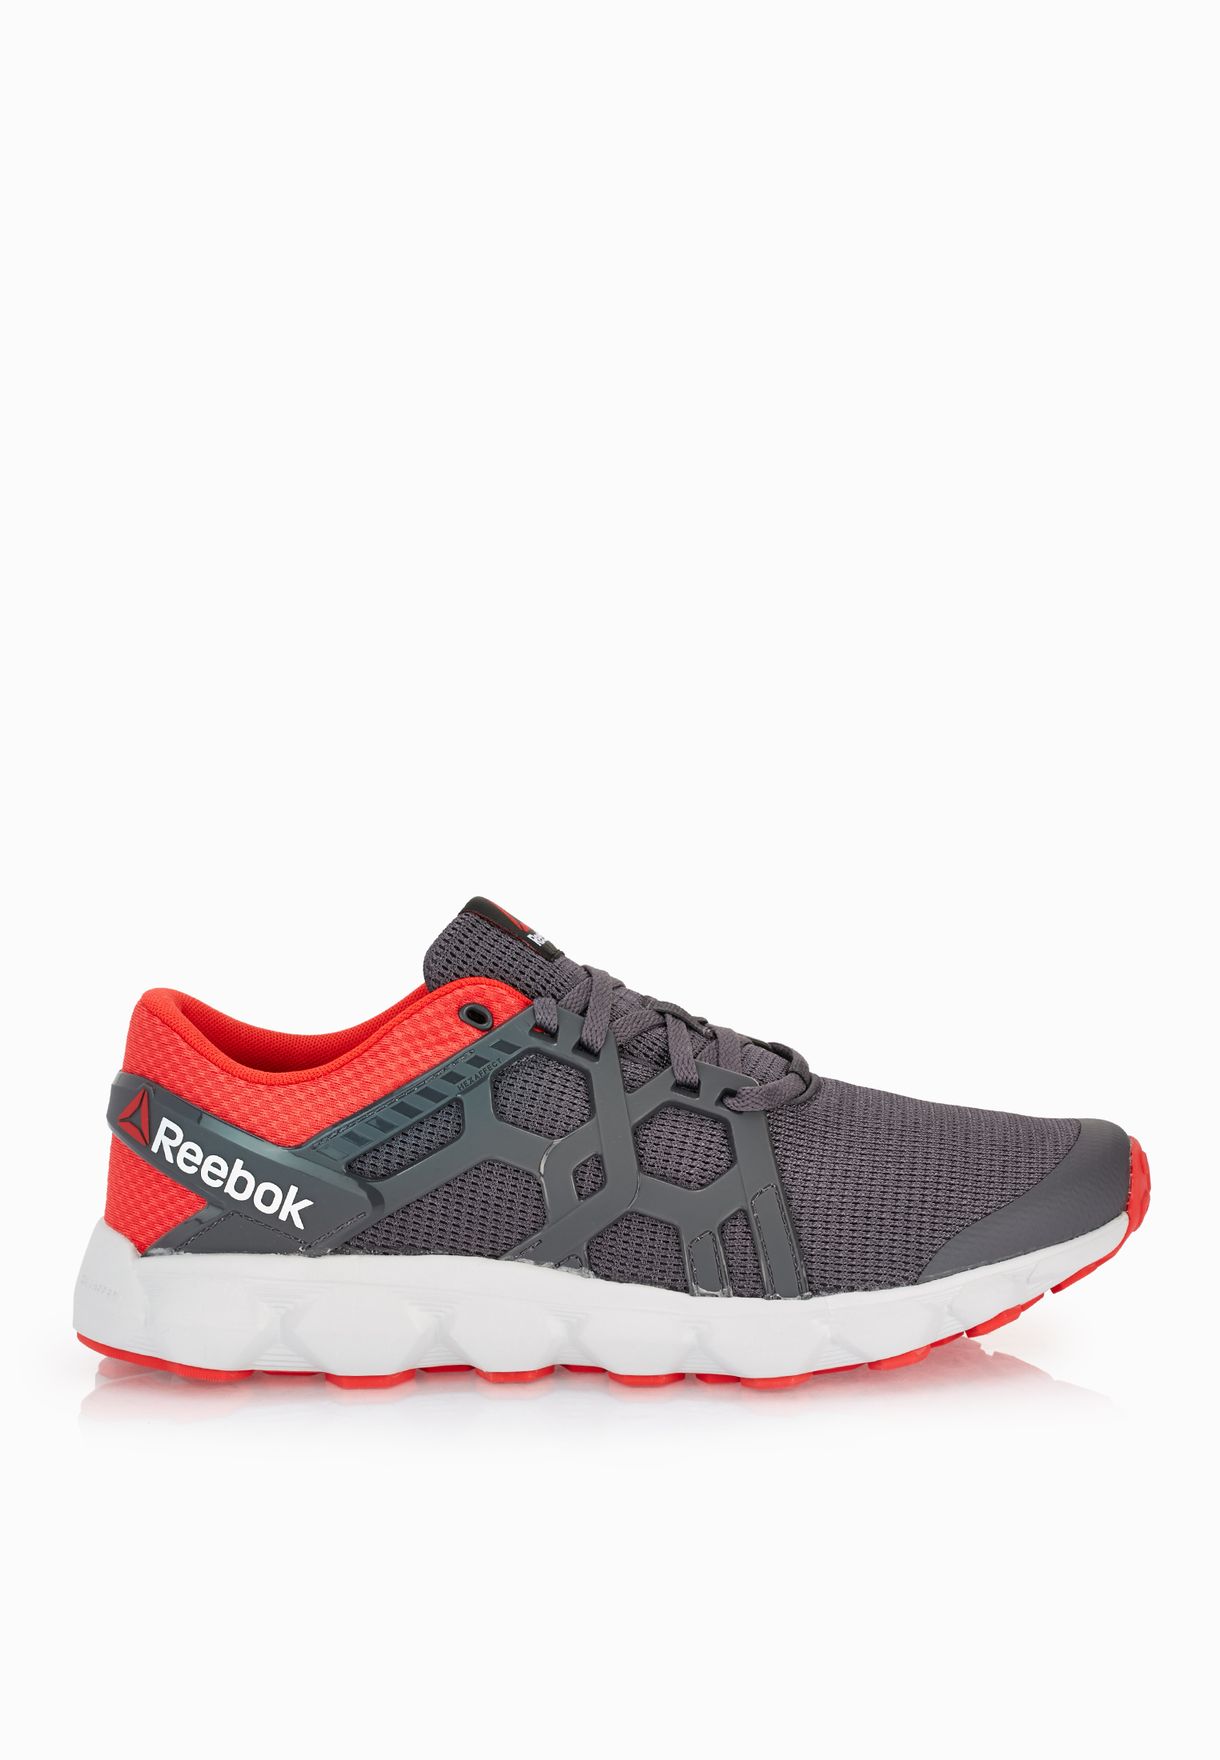 reebok shoes price and models